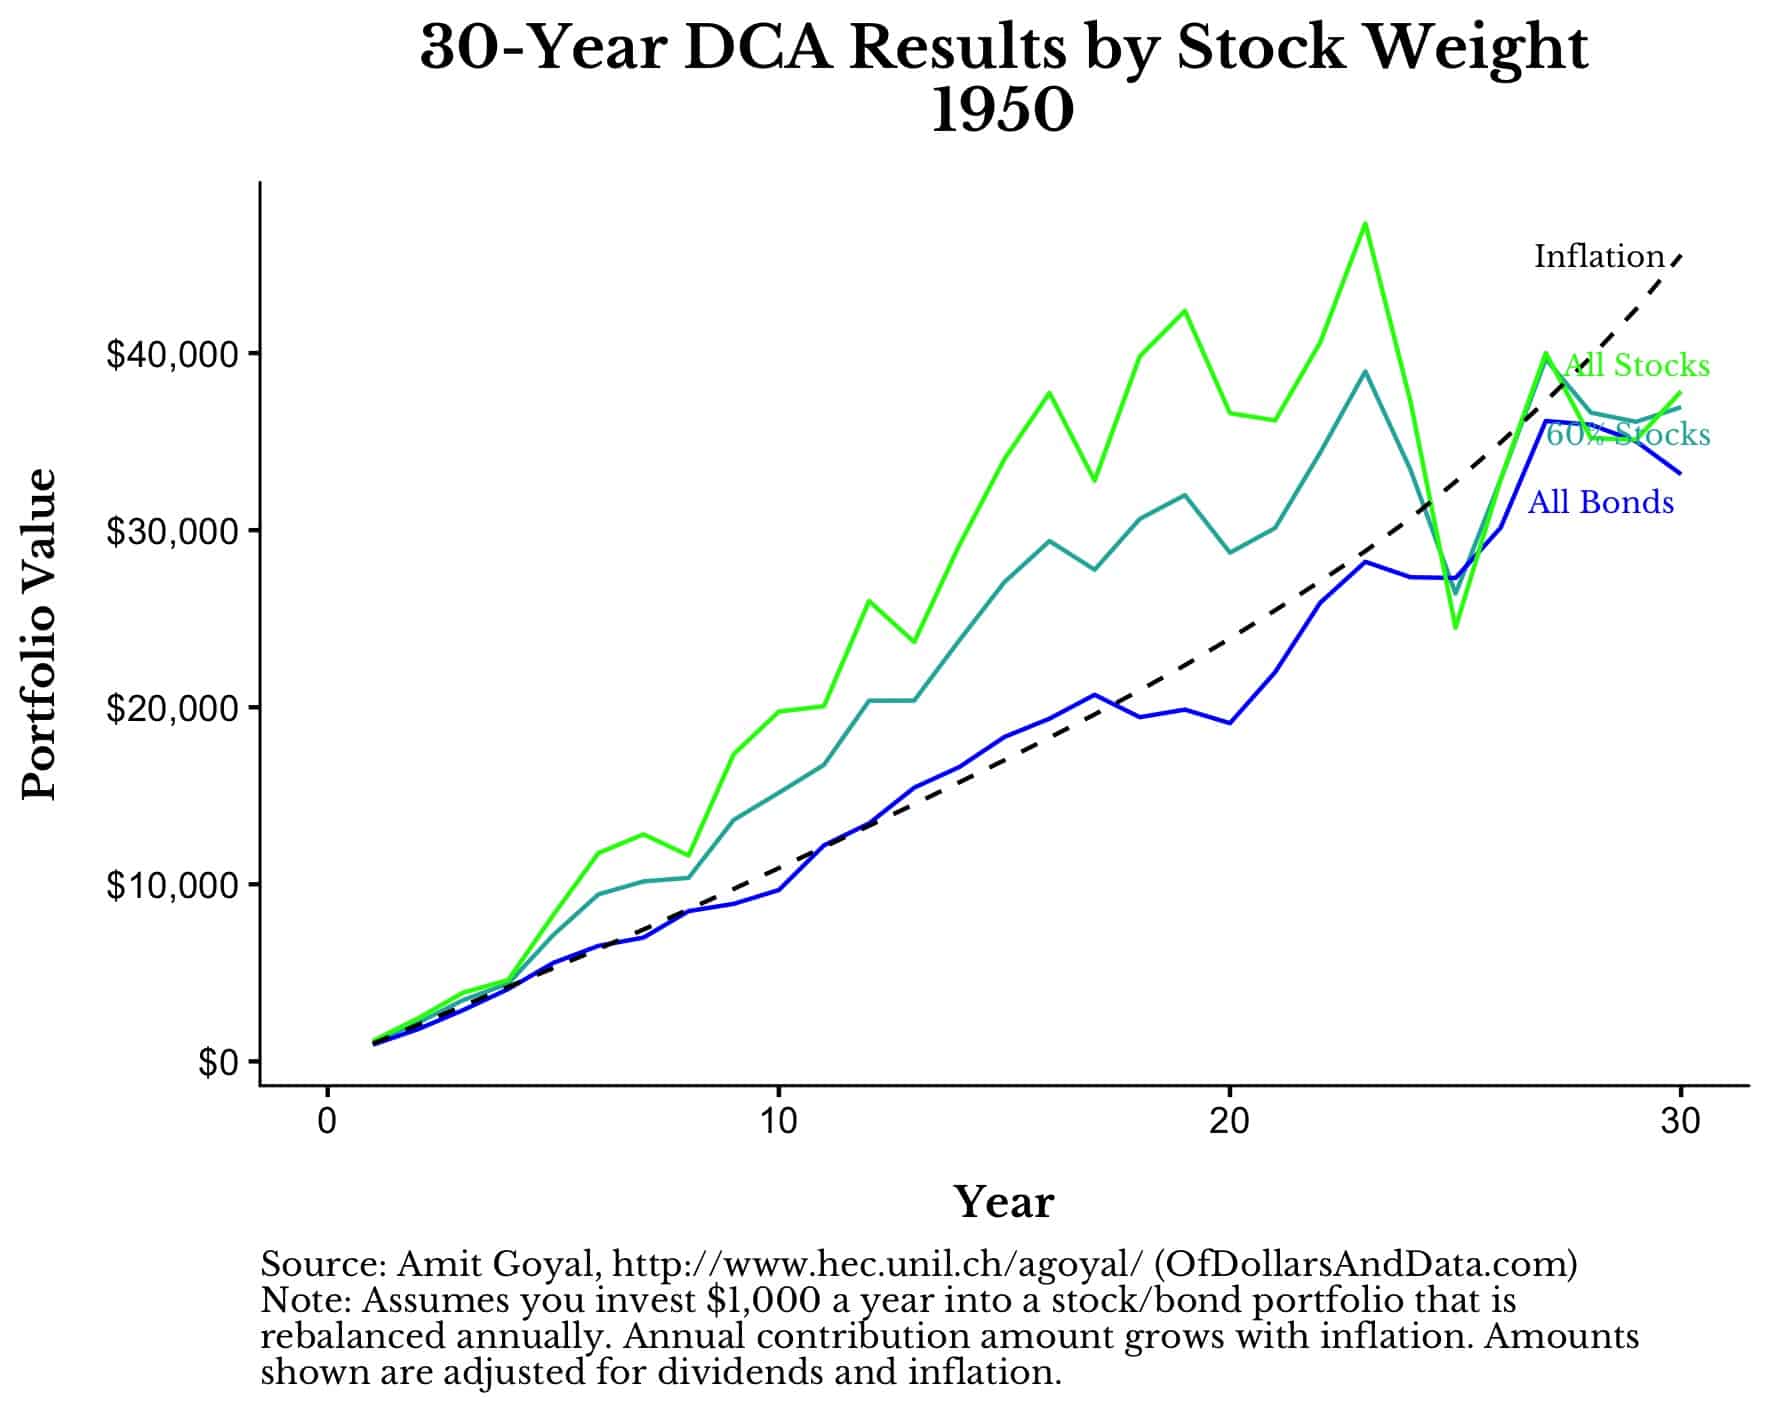 30-year DCA result by stock weight for different portfolios of US stocks and bonds from 1950 onward